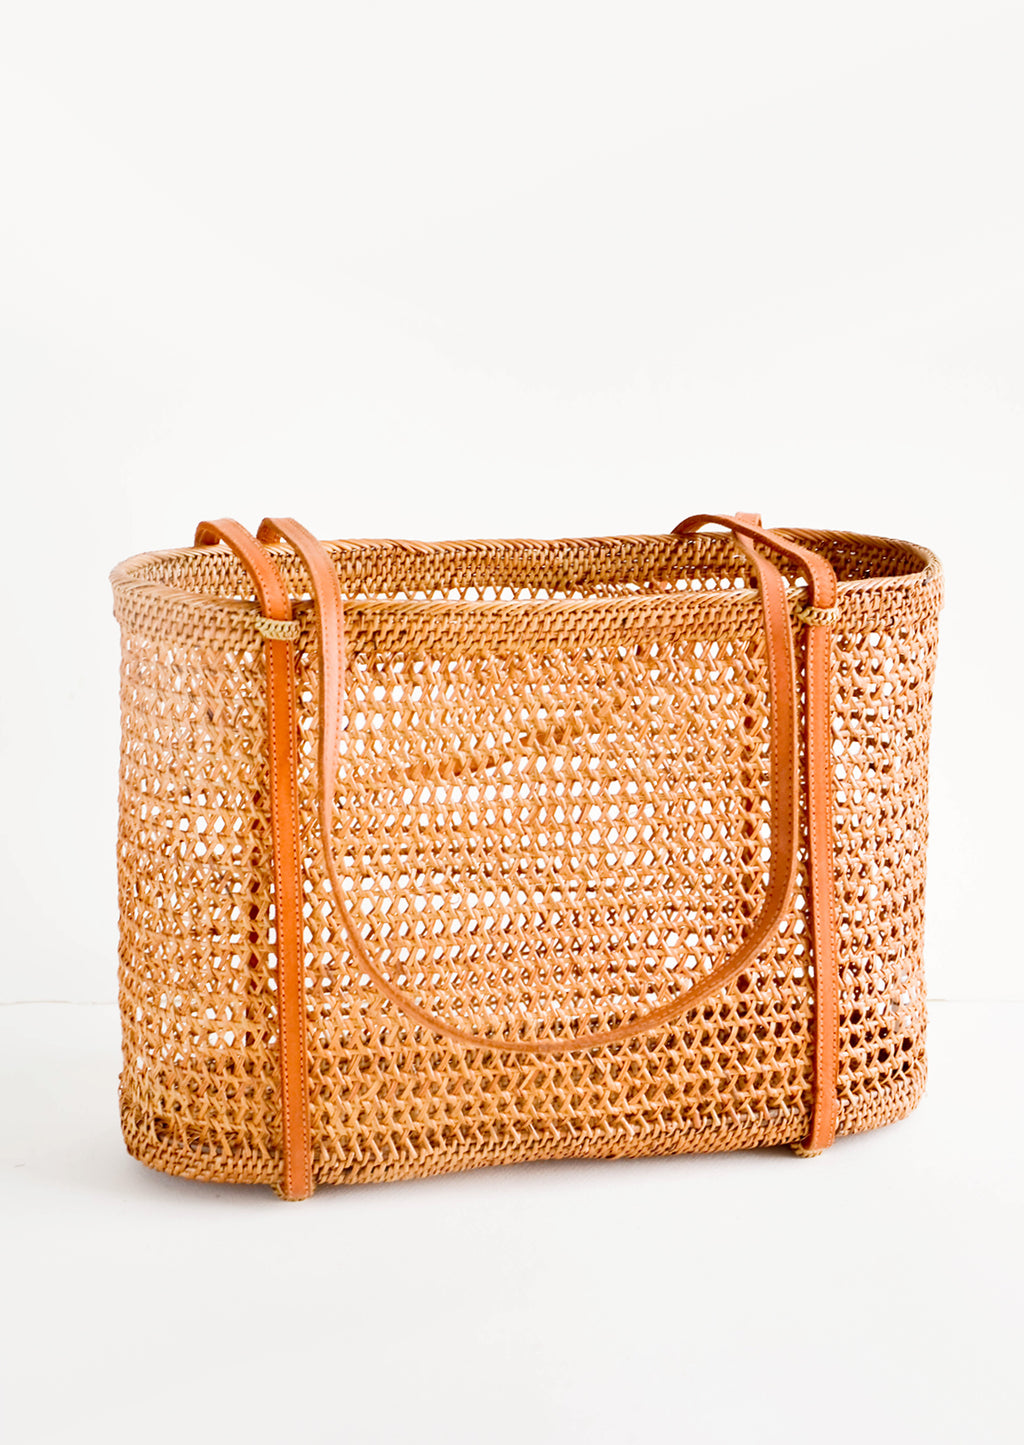 1: East-west tote bag made from open weave rattan, thin, tanned leather shoulder straps wrap around the bottom of the bag